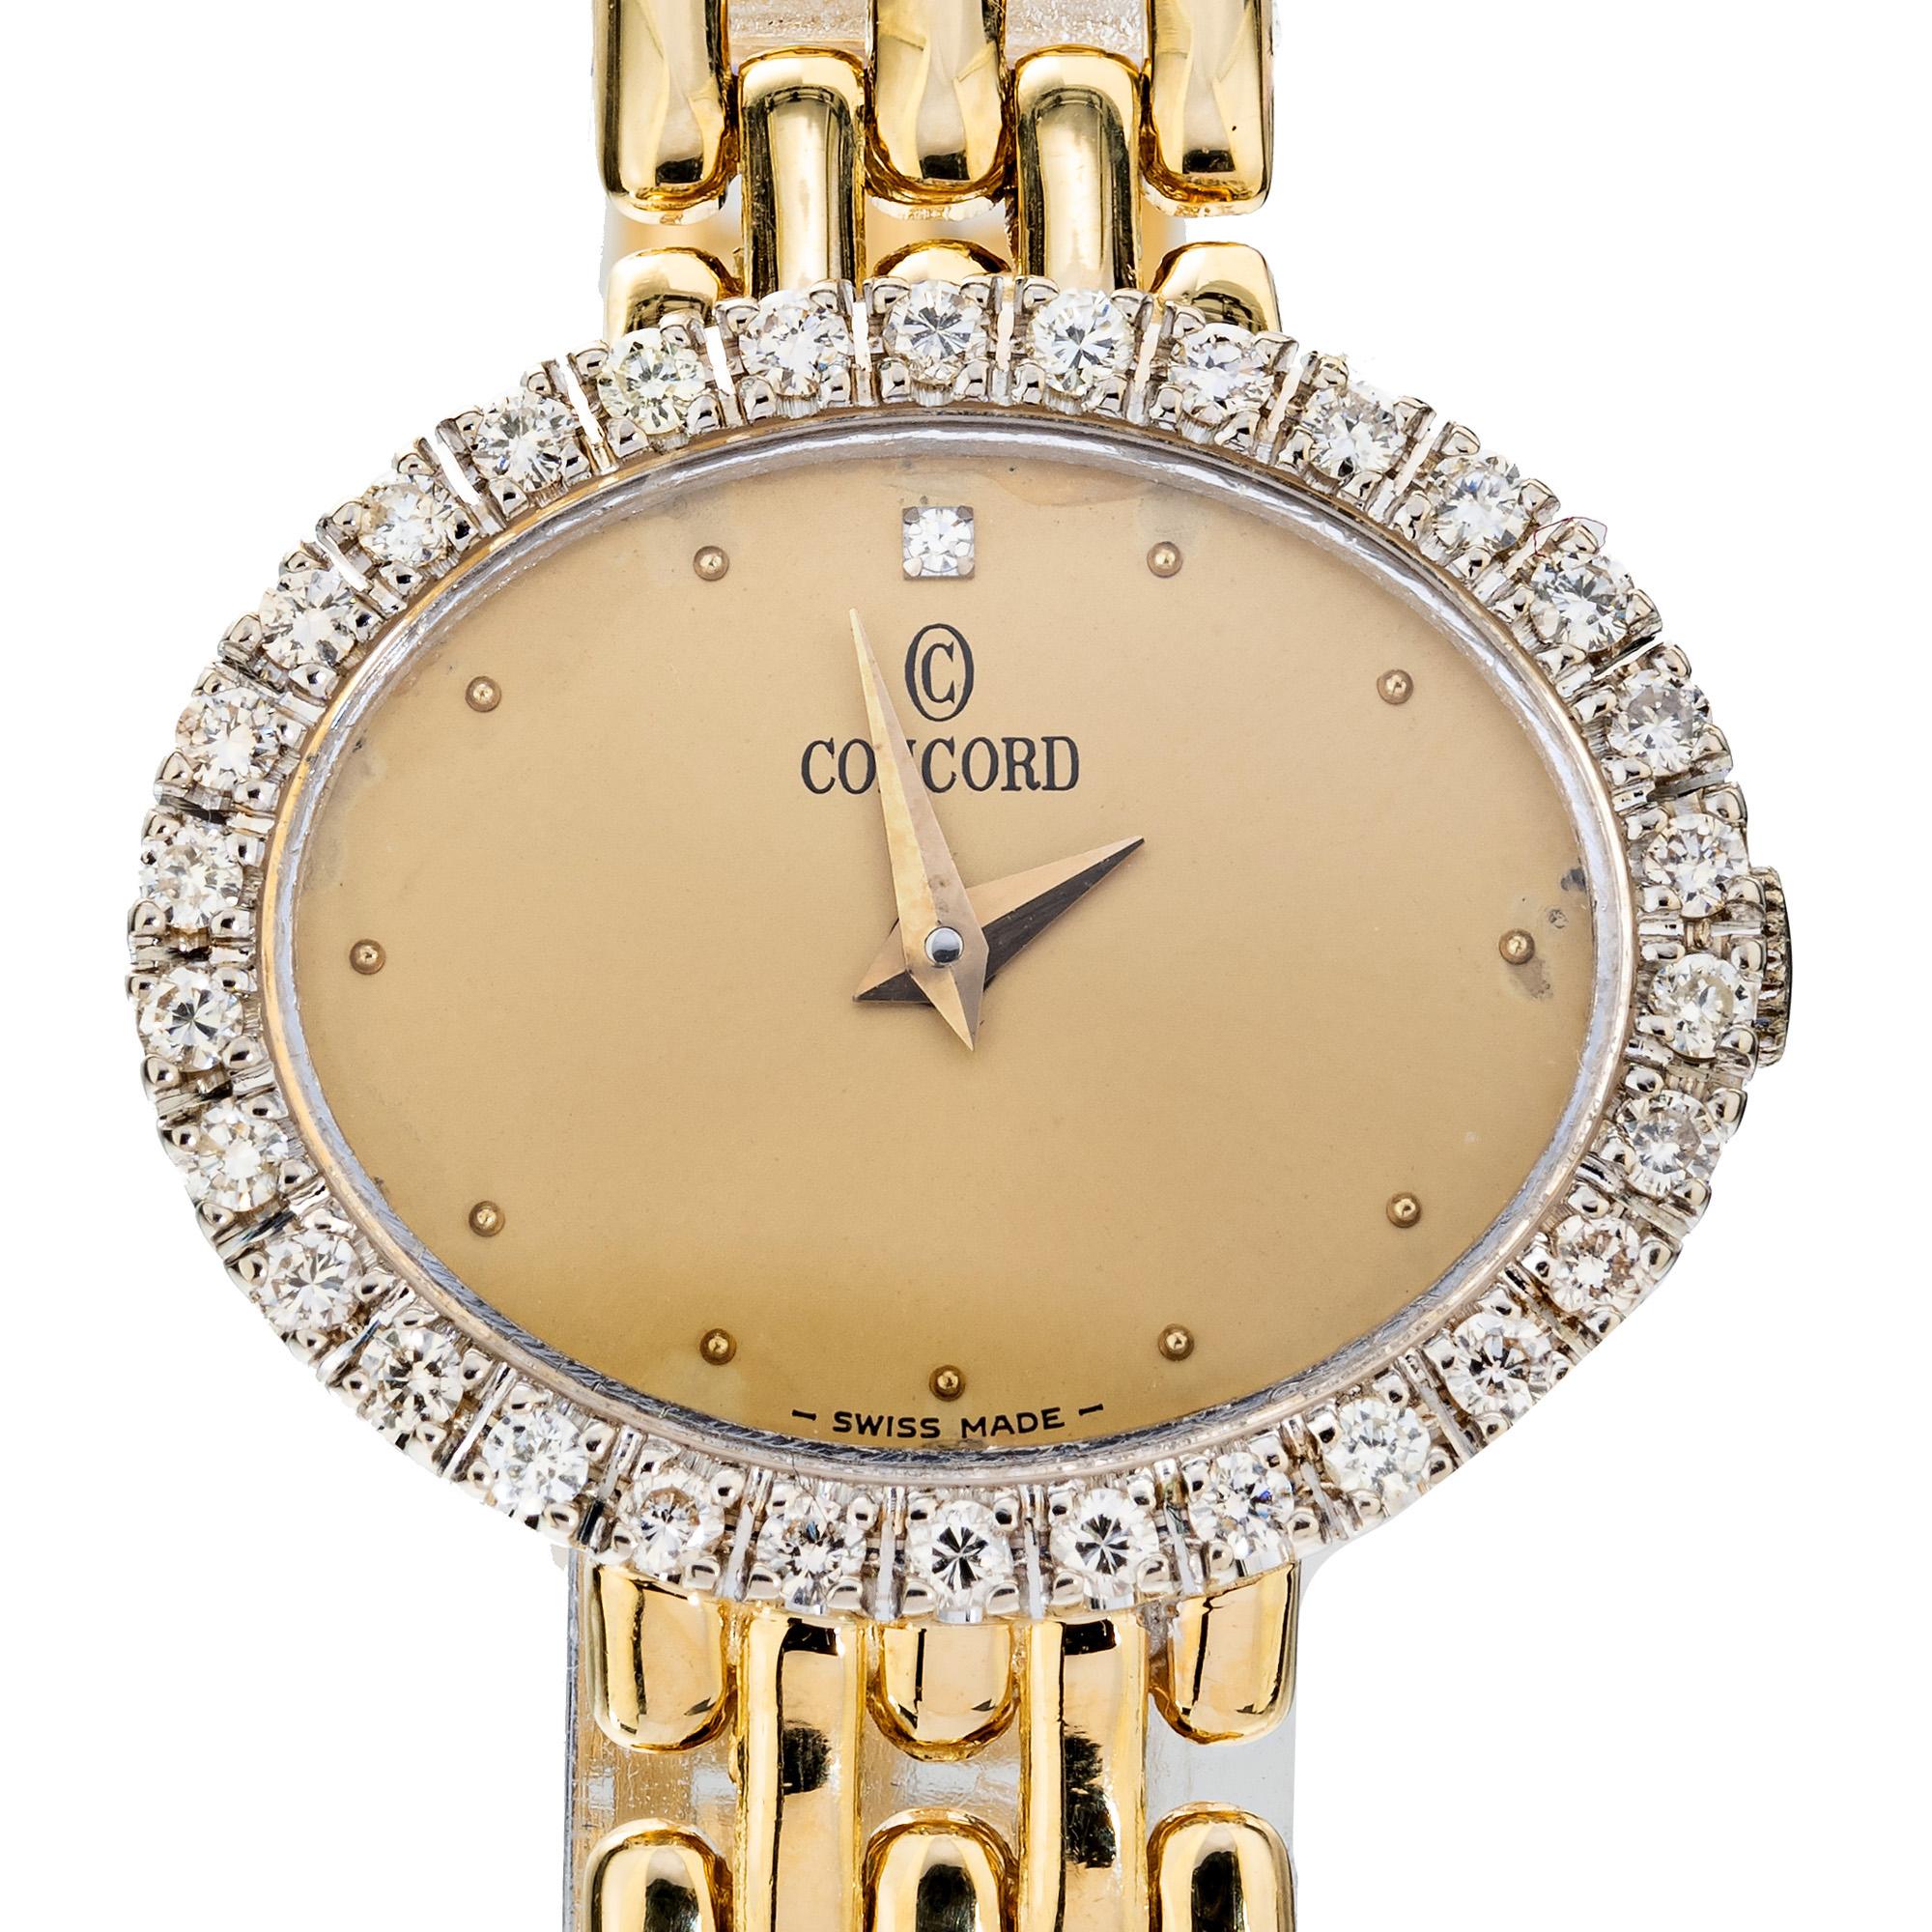 Diamond gold Concord Ladies quartz wristwatch. Oval dial with an 18k yellow gold a bezel halo of round cut diamonds. A single round diamond sits at the 12 O'clock position. The panther style band is solid 18k yellow gold.

Length: 19.20mm
Width: